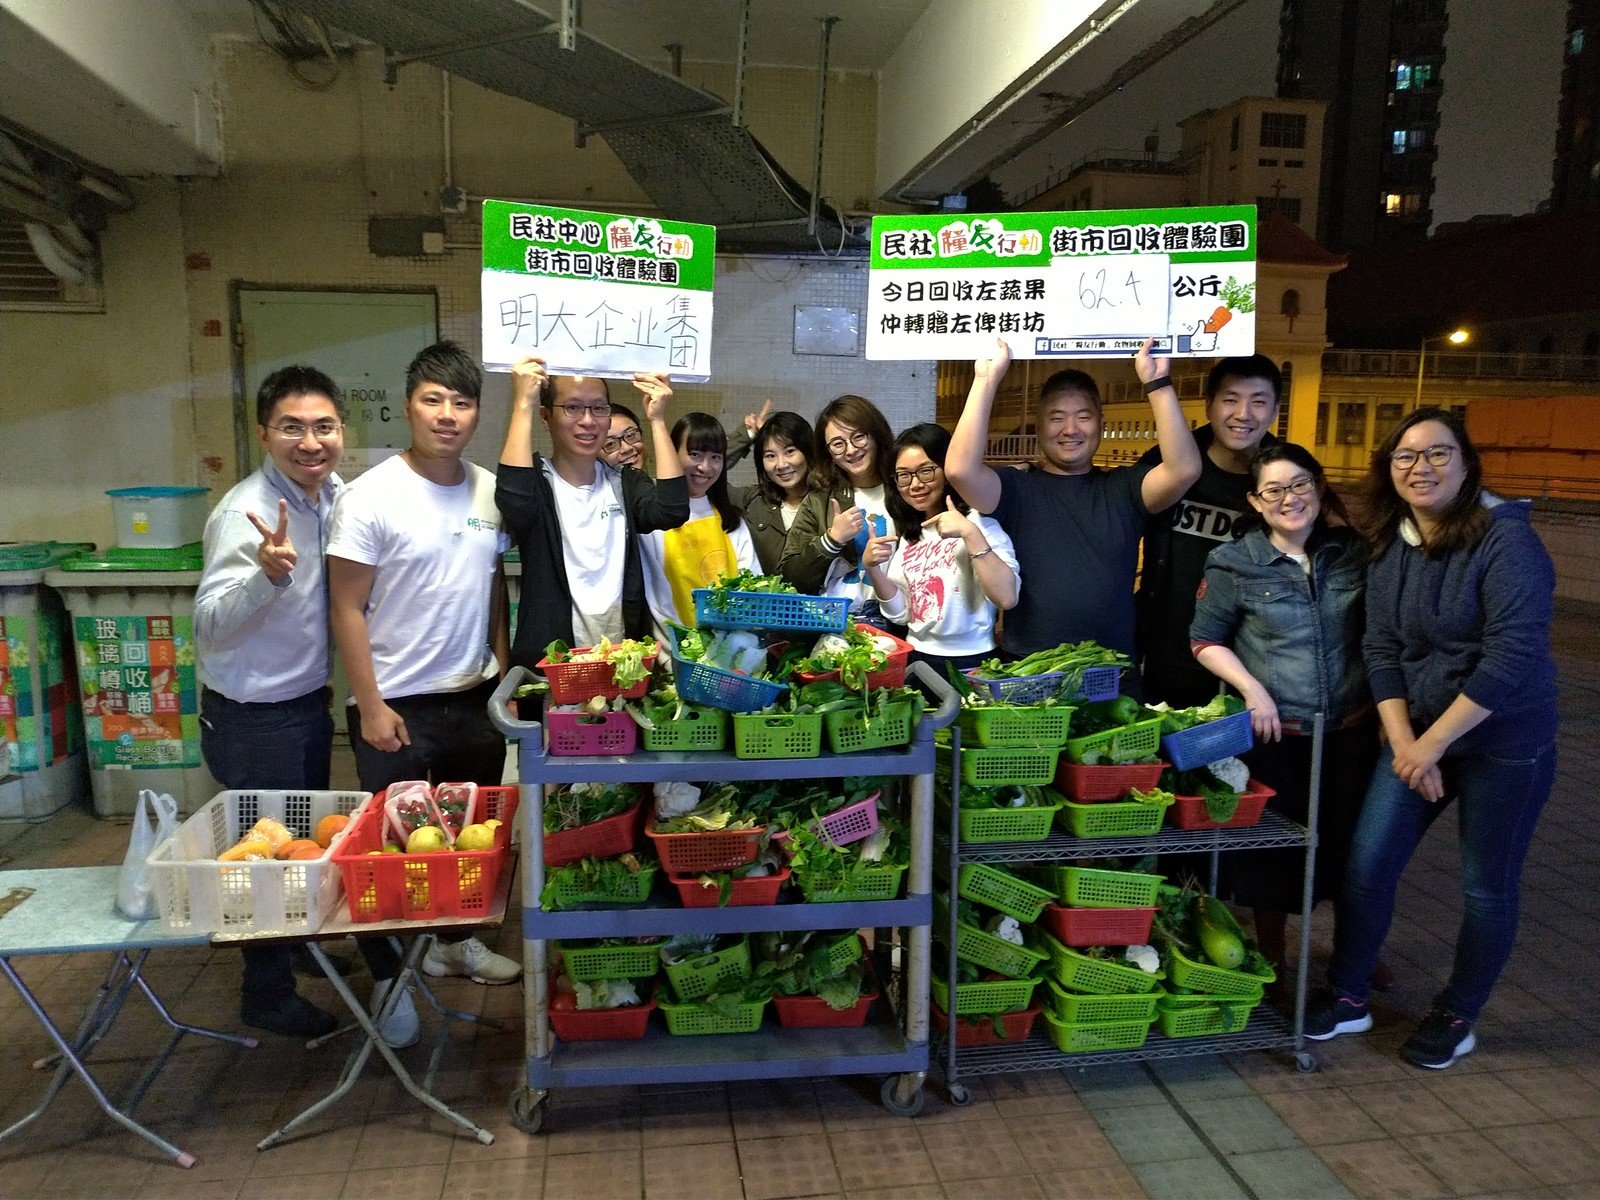 Colleagues from AE Majoris joined the Oxfam Food Waste Workshop in the evening on 7 December 2019. They collected a total of 62.4 kg unsold vegetables, fruits and bread from the markets nearby and distributed them to the elderly in need who live in the district.